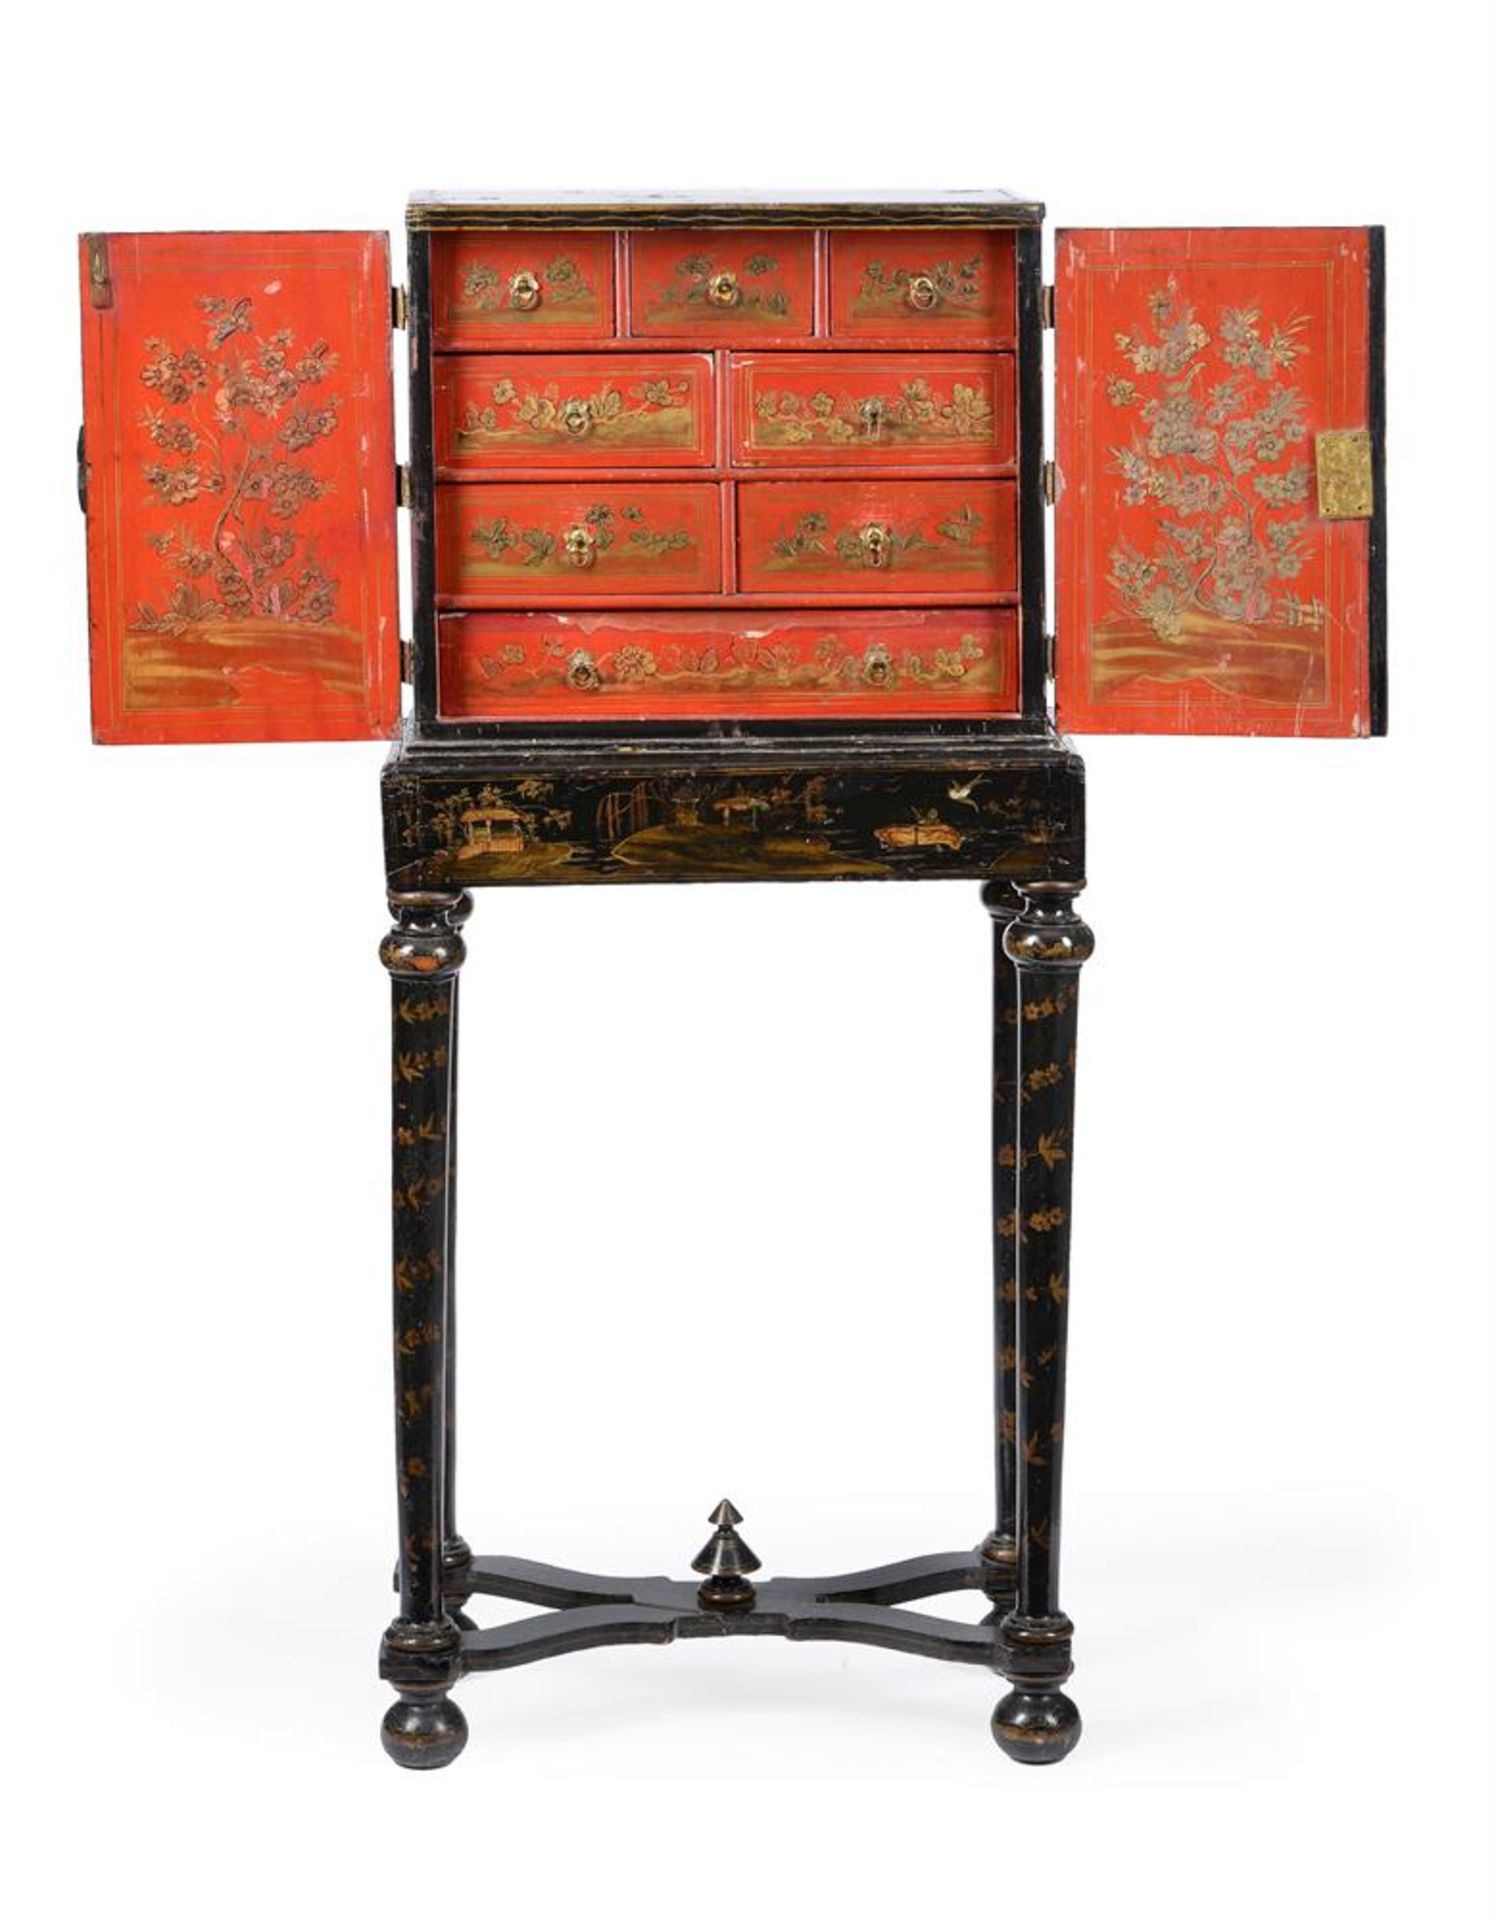 Y A BLACK LACQUER, GILT CHINOISERIE AND MOTHER OF PEARL INLAID CABINET ON STAND - Image 4 of 7